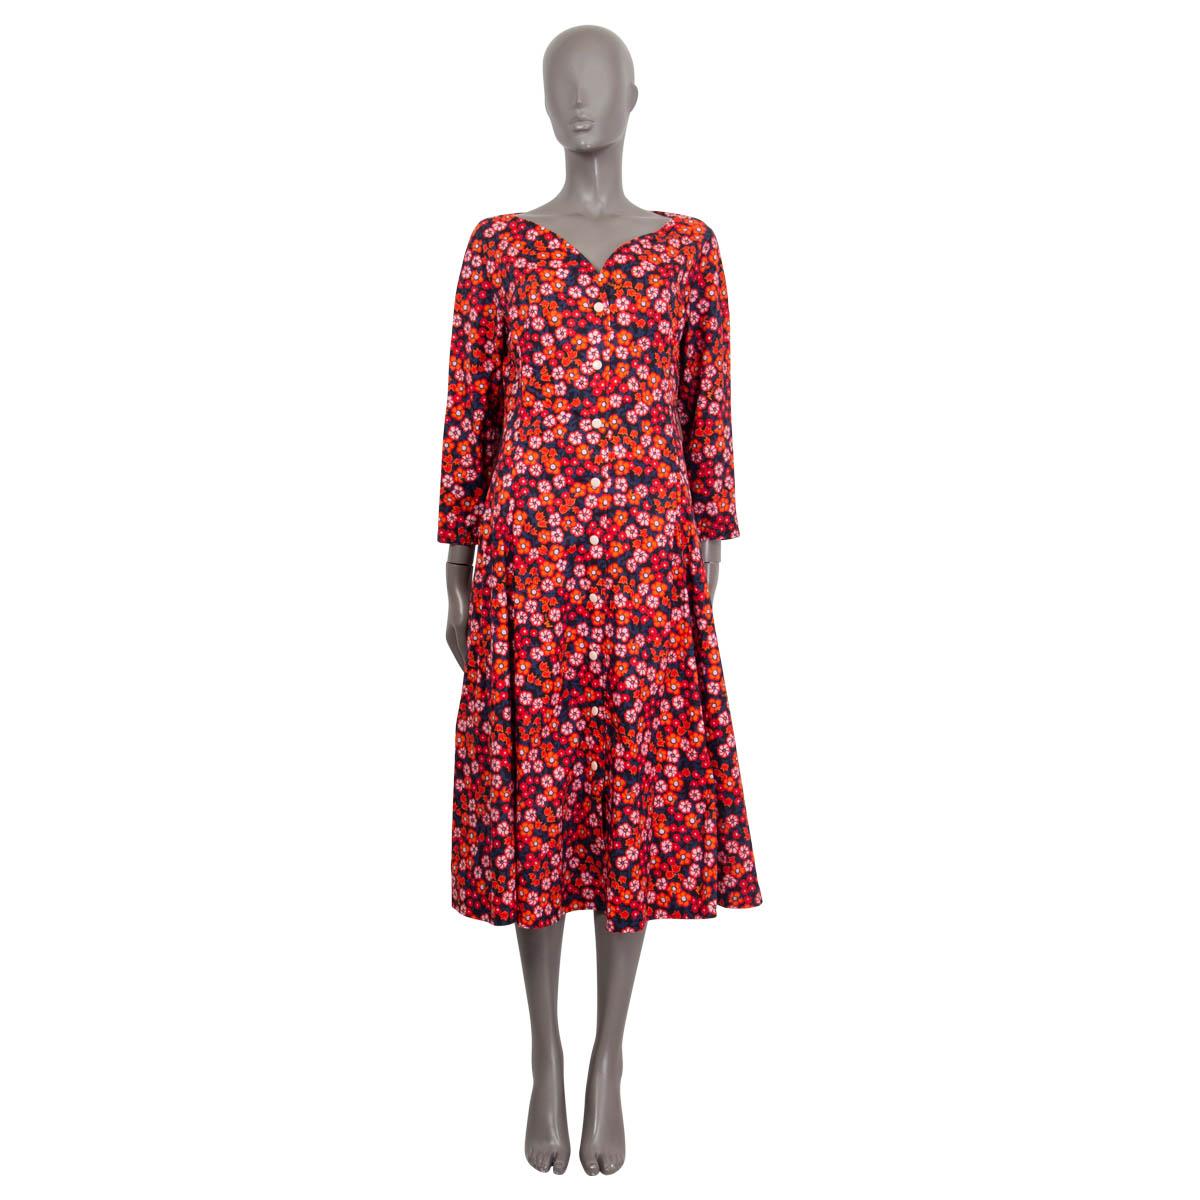 100% authentic Marni midi poplin dress in red, black, navy, black and orange cotton (100%). Resort 2021 collection. Marni is renowned for throwback printwork for more many reasons – with this red-and-orange floral dress being just one. Made in Italy